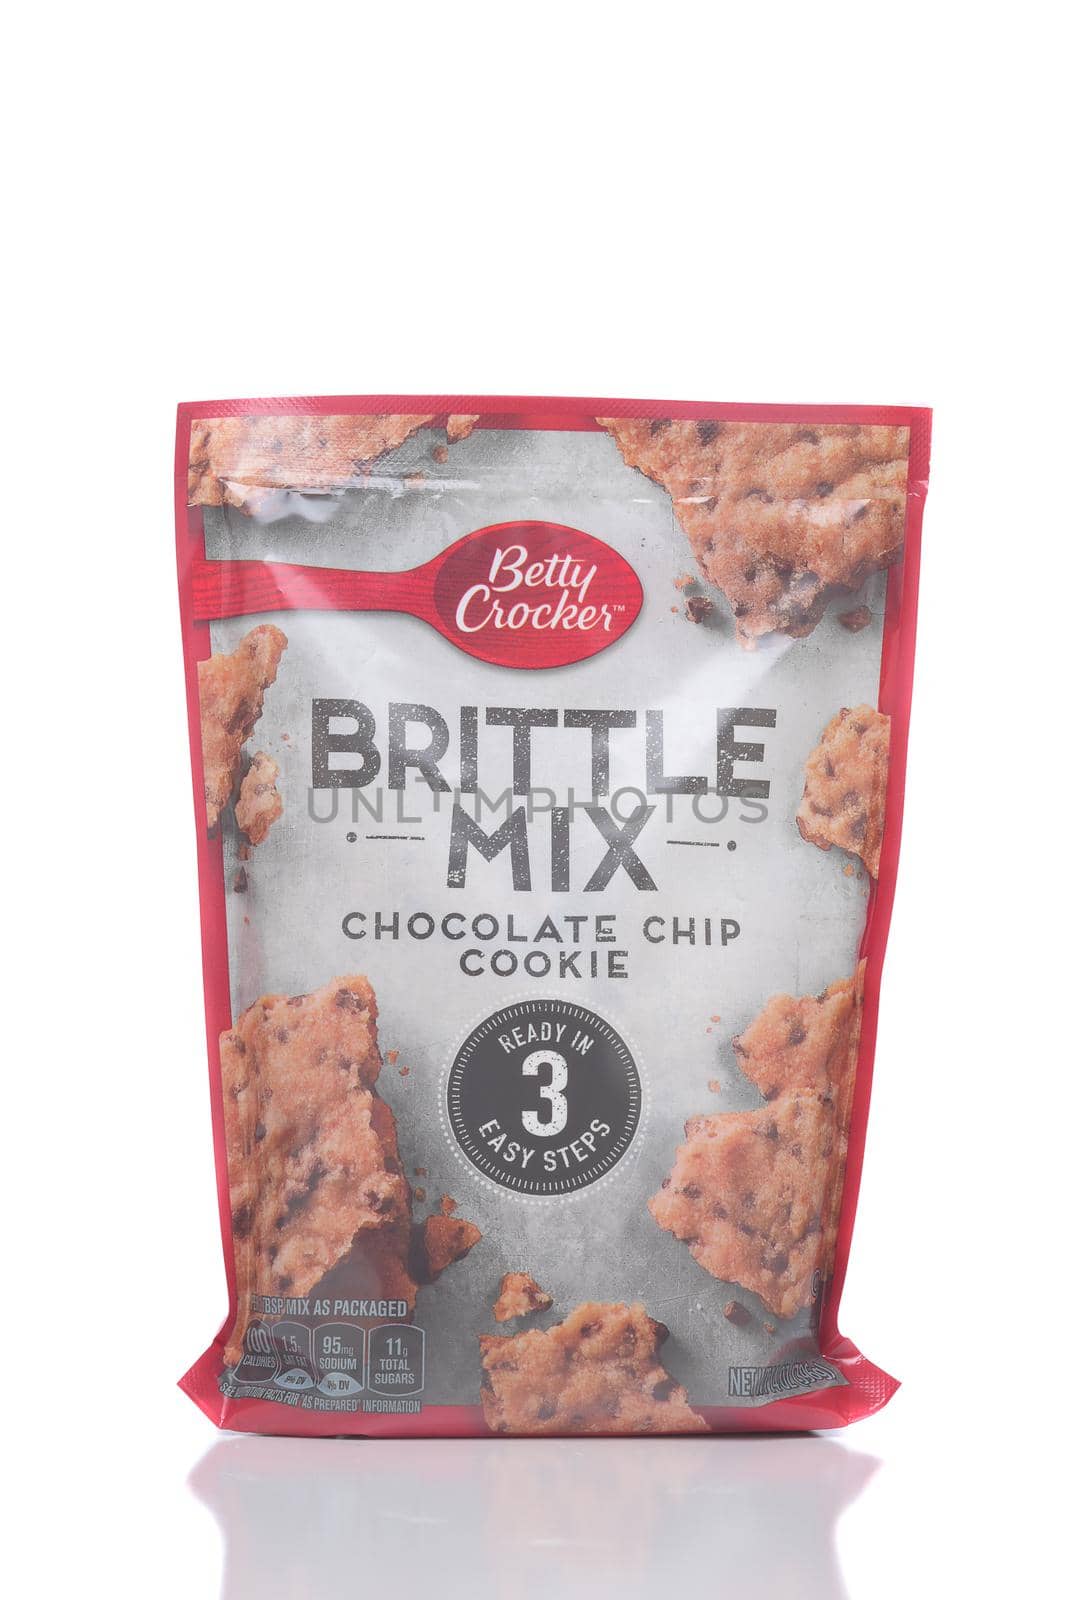 IRVINE, CALIFORNIA - 28 MAY 2021: A package of Betty Crocker Brittle Mix Chocolate Chip Cookies. by sCukrov